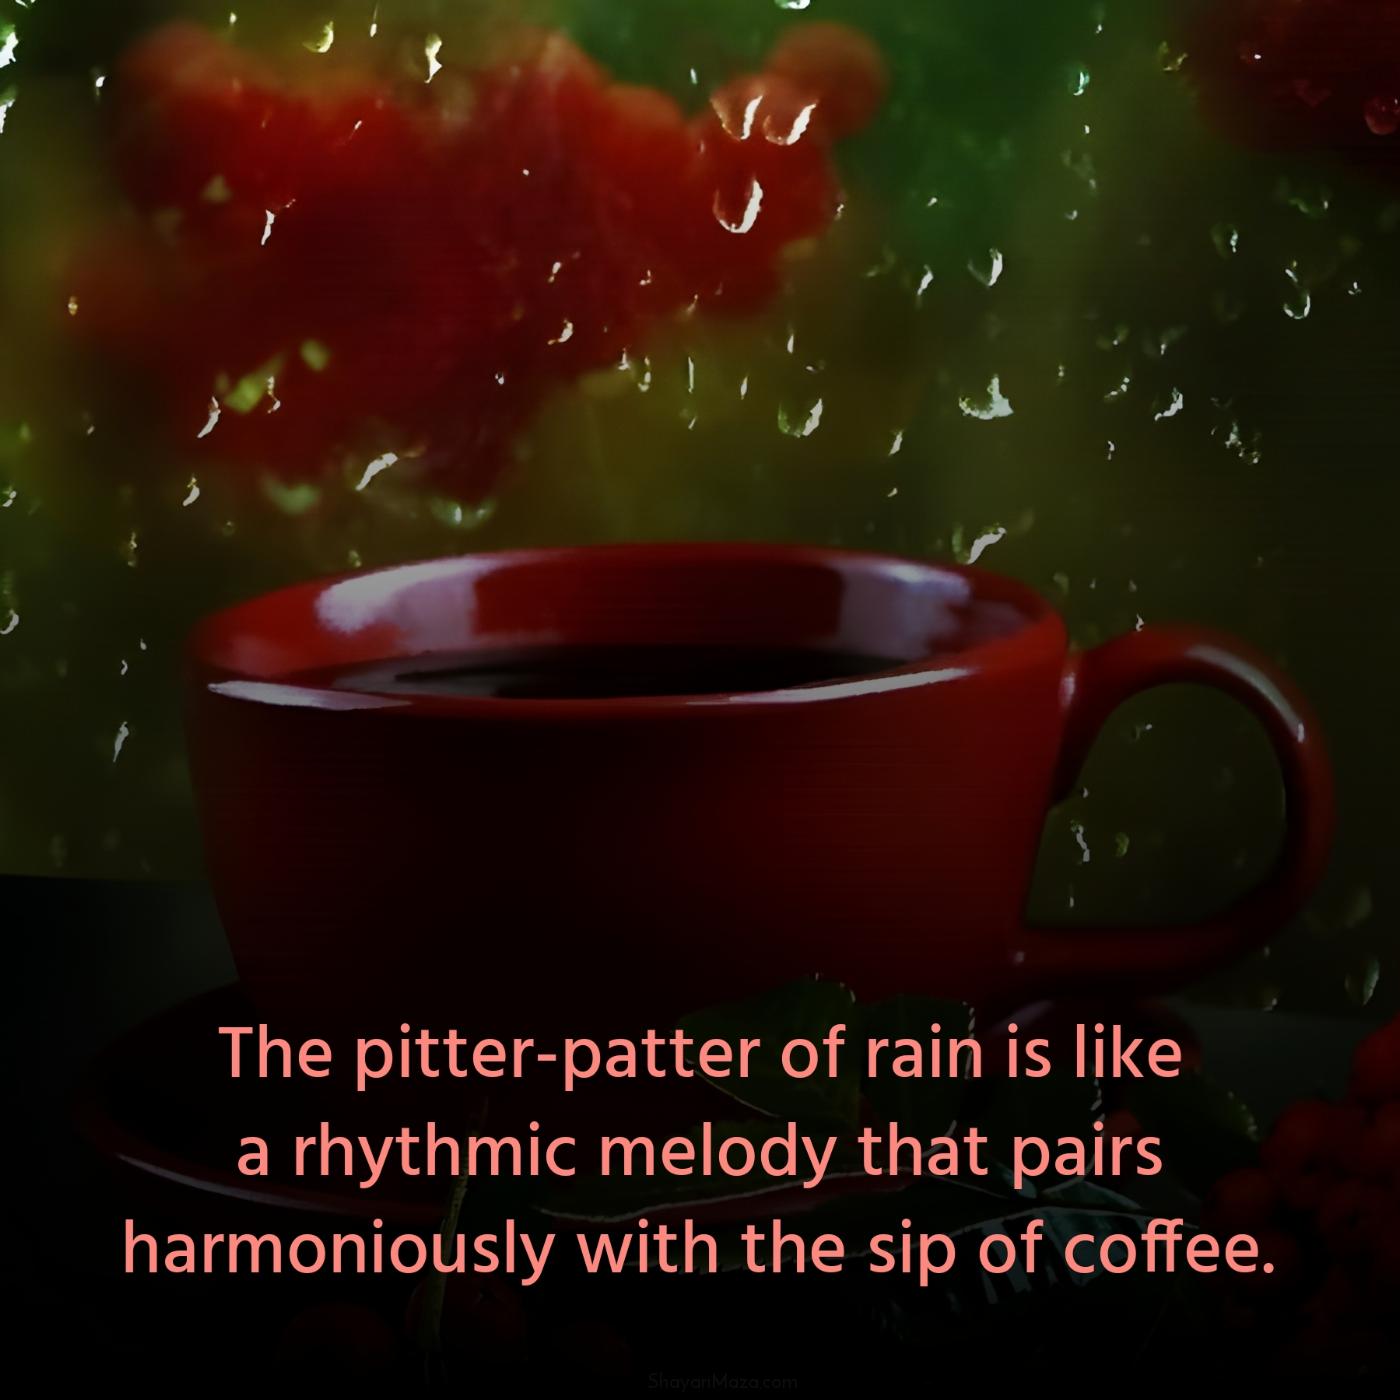 The pitter-patter of rain is like a rhythmic melody that pairs harmoniously